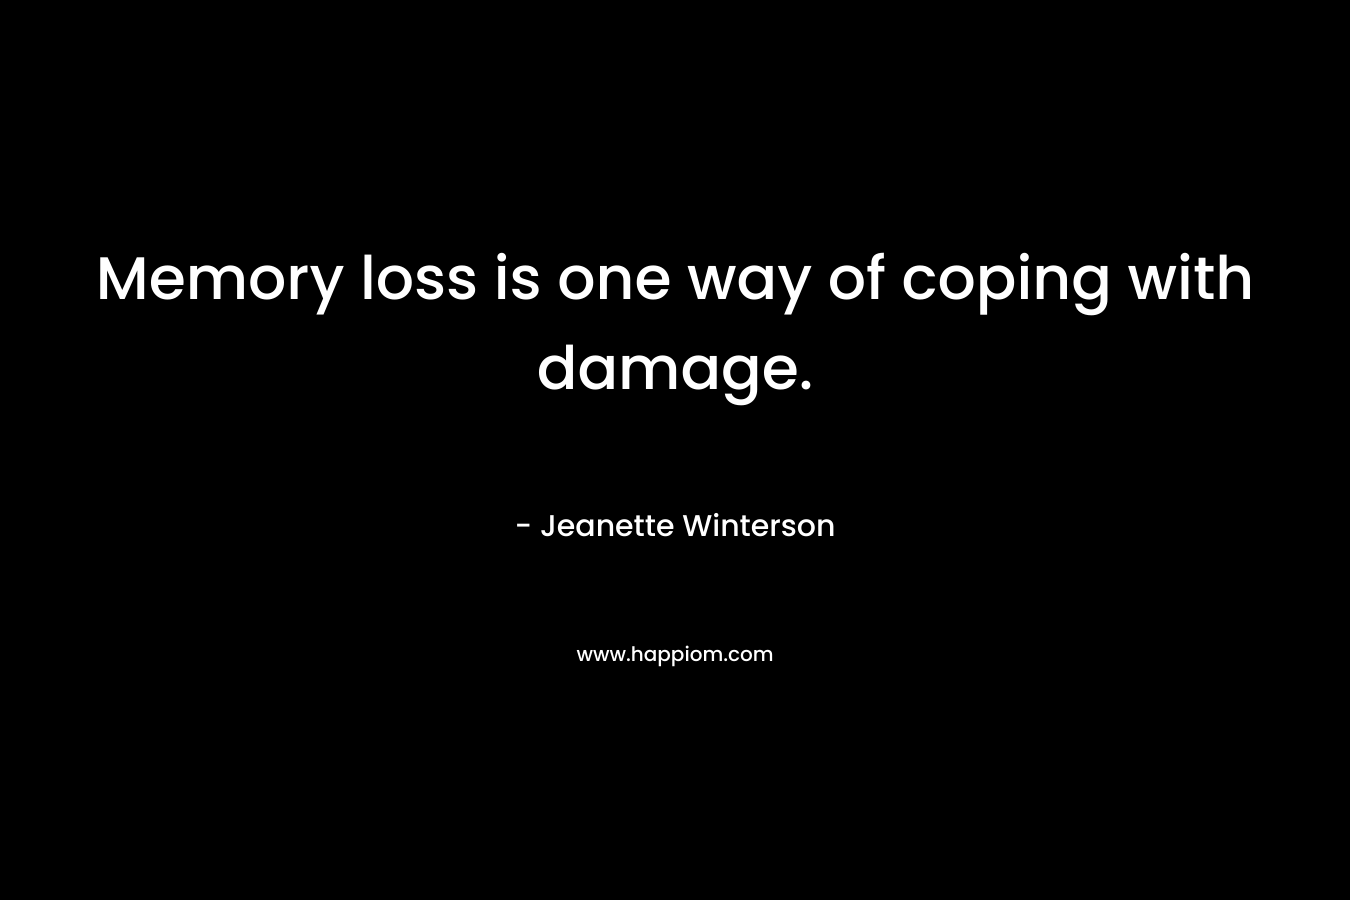 Memory loss is one way of coping with damage. – Jeanette Winterson